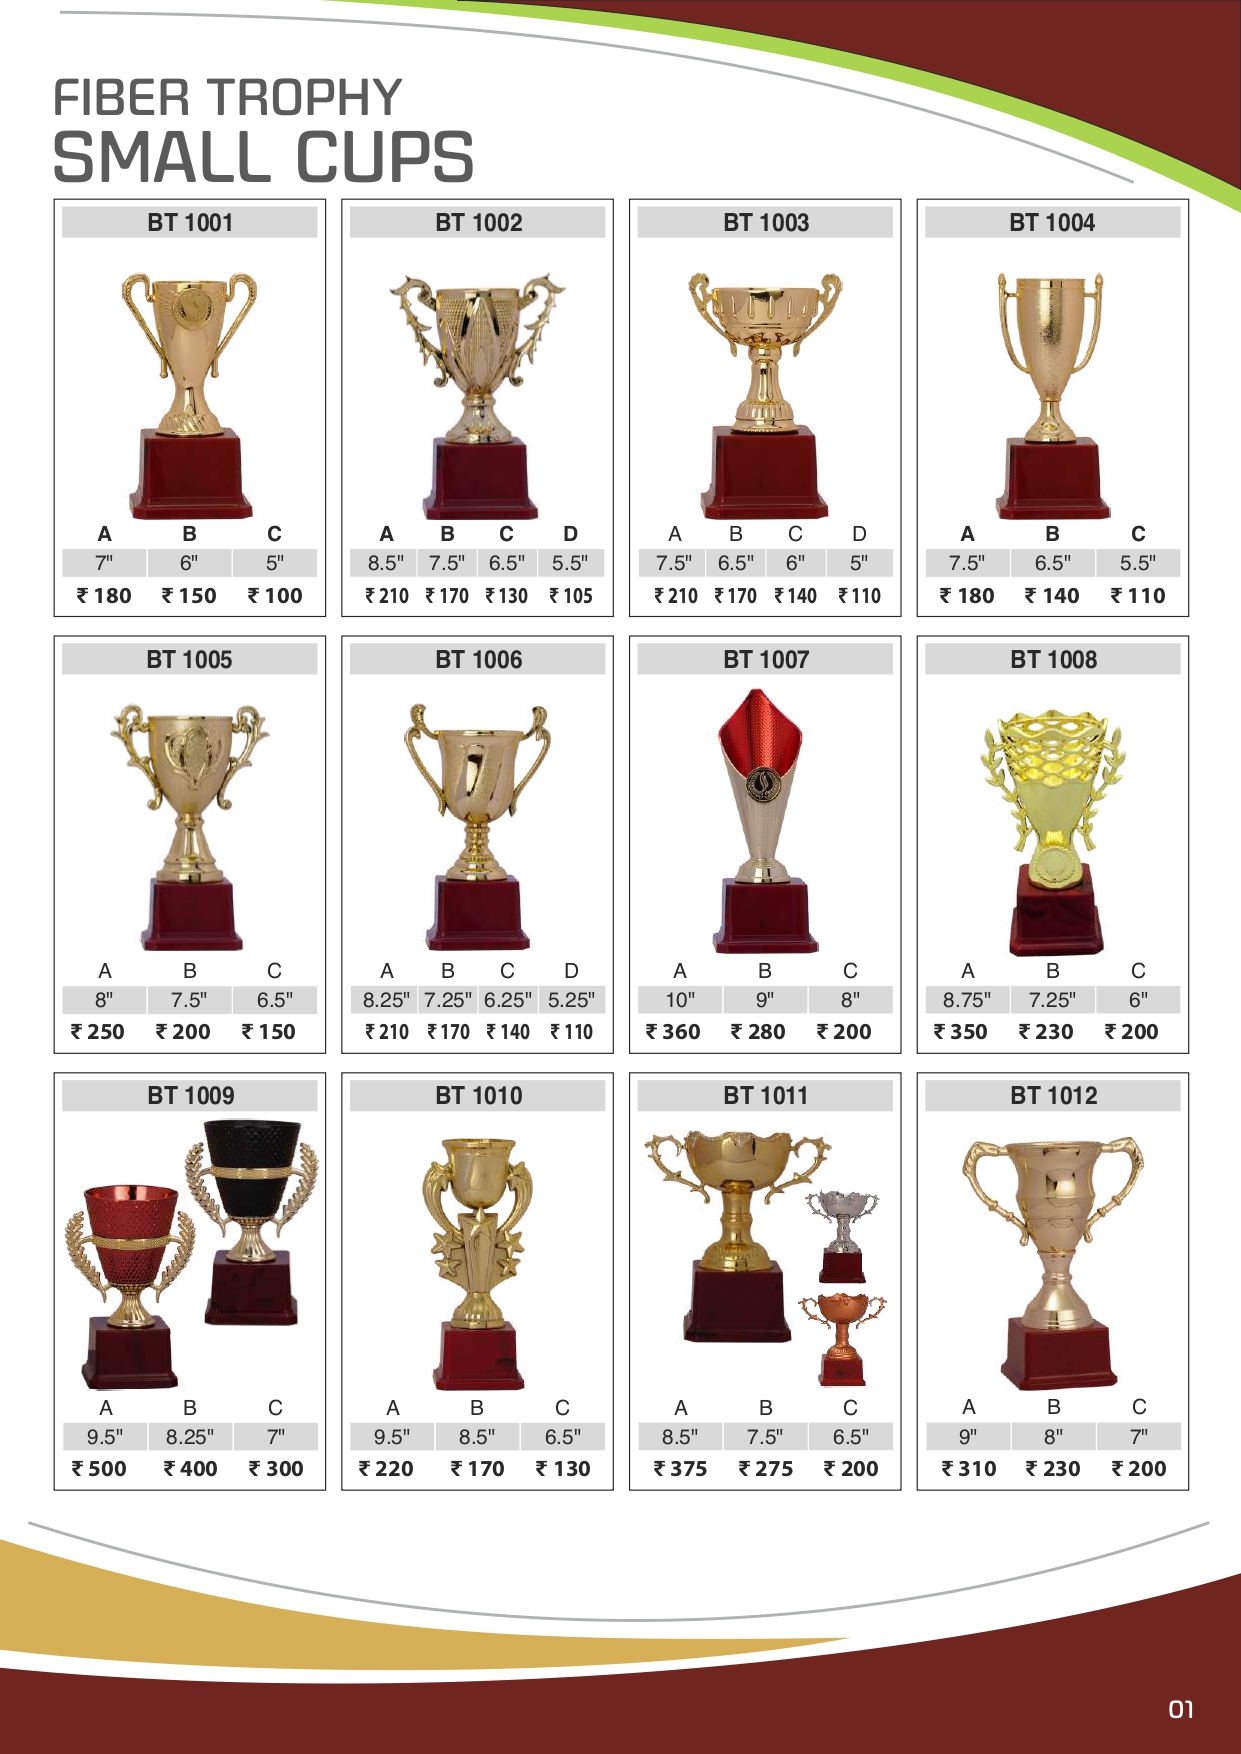 Saga Sports And Trophies - Fiber Trophy Small Cups